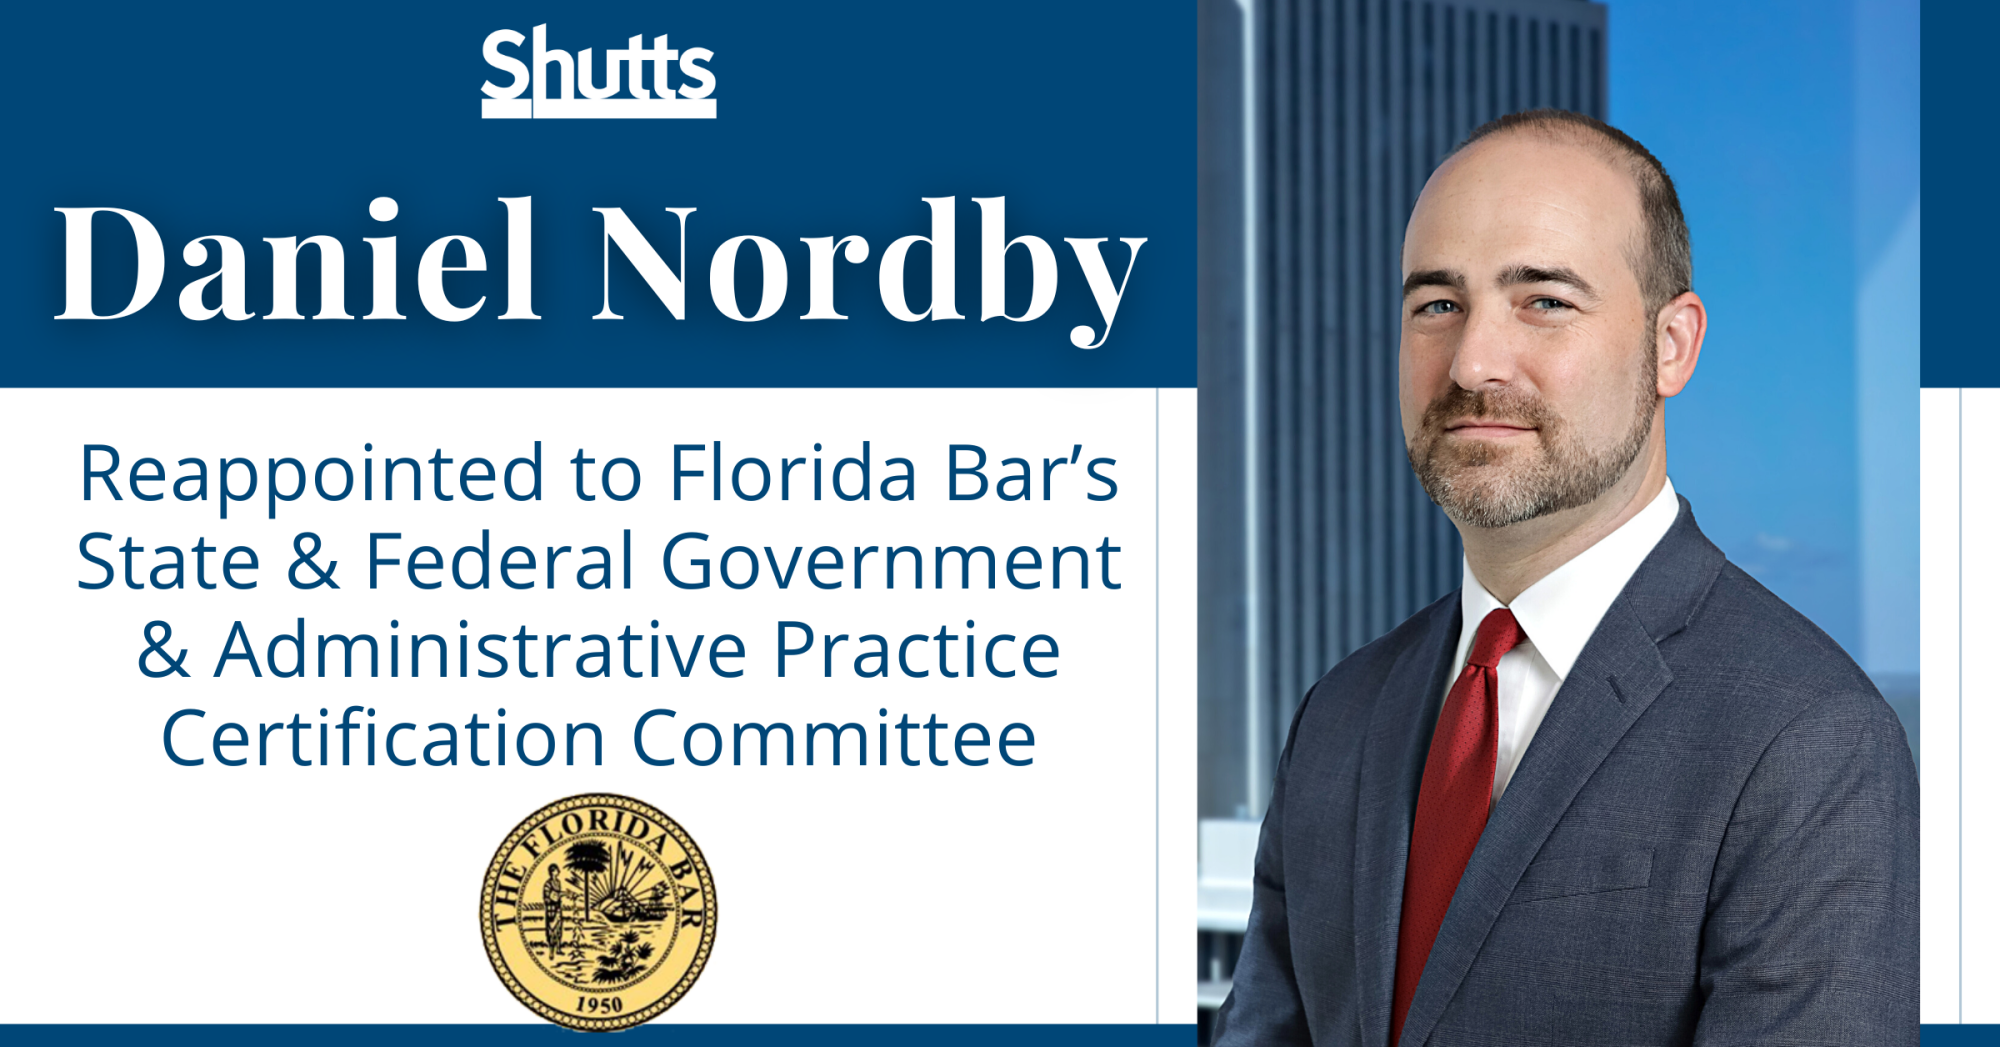 Daniel Nordby Reappointed to Florida Bar’s State & Federal Government & Administrative Practice Certification Committee